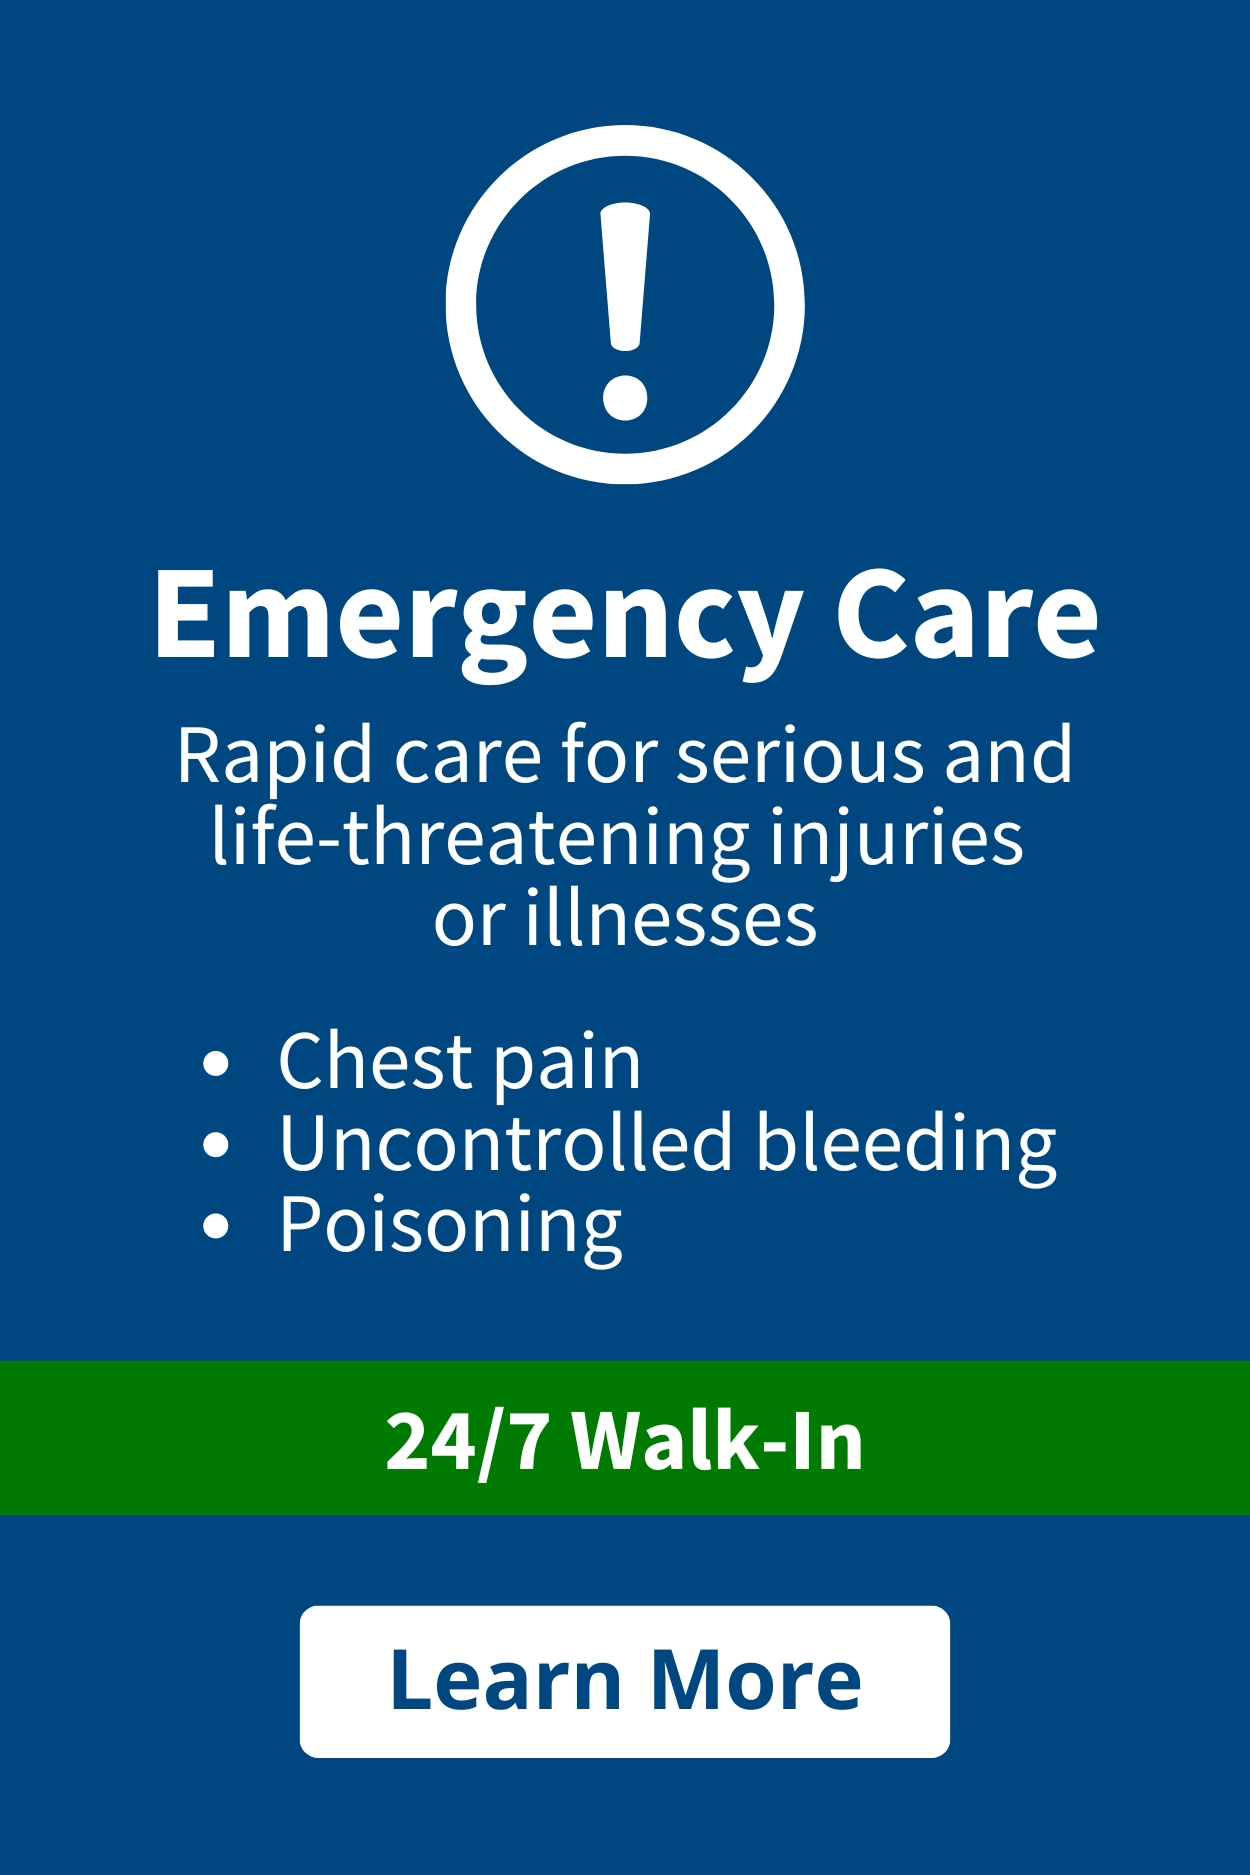 Blue graphic with text reading "Emergency Care. Rapid care for serious and life-threatening injuries or illnesses." Bullet points read: "Chest pain, uncontrolled bleeding, poisoning." Light blue bar reads "24/7Walk-In." Button reads "Learn More"